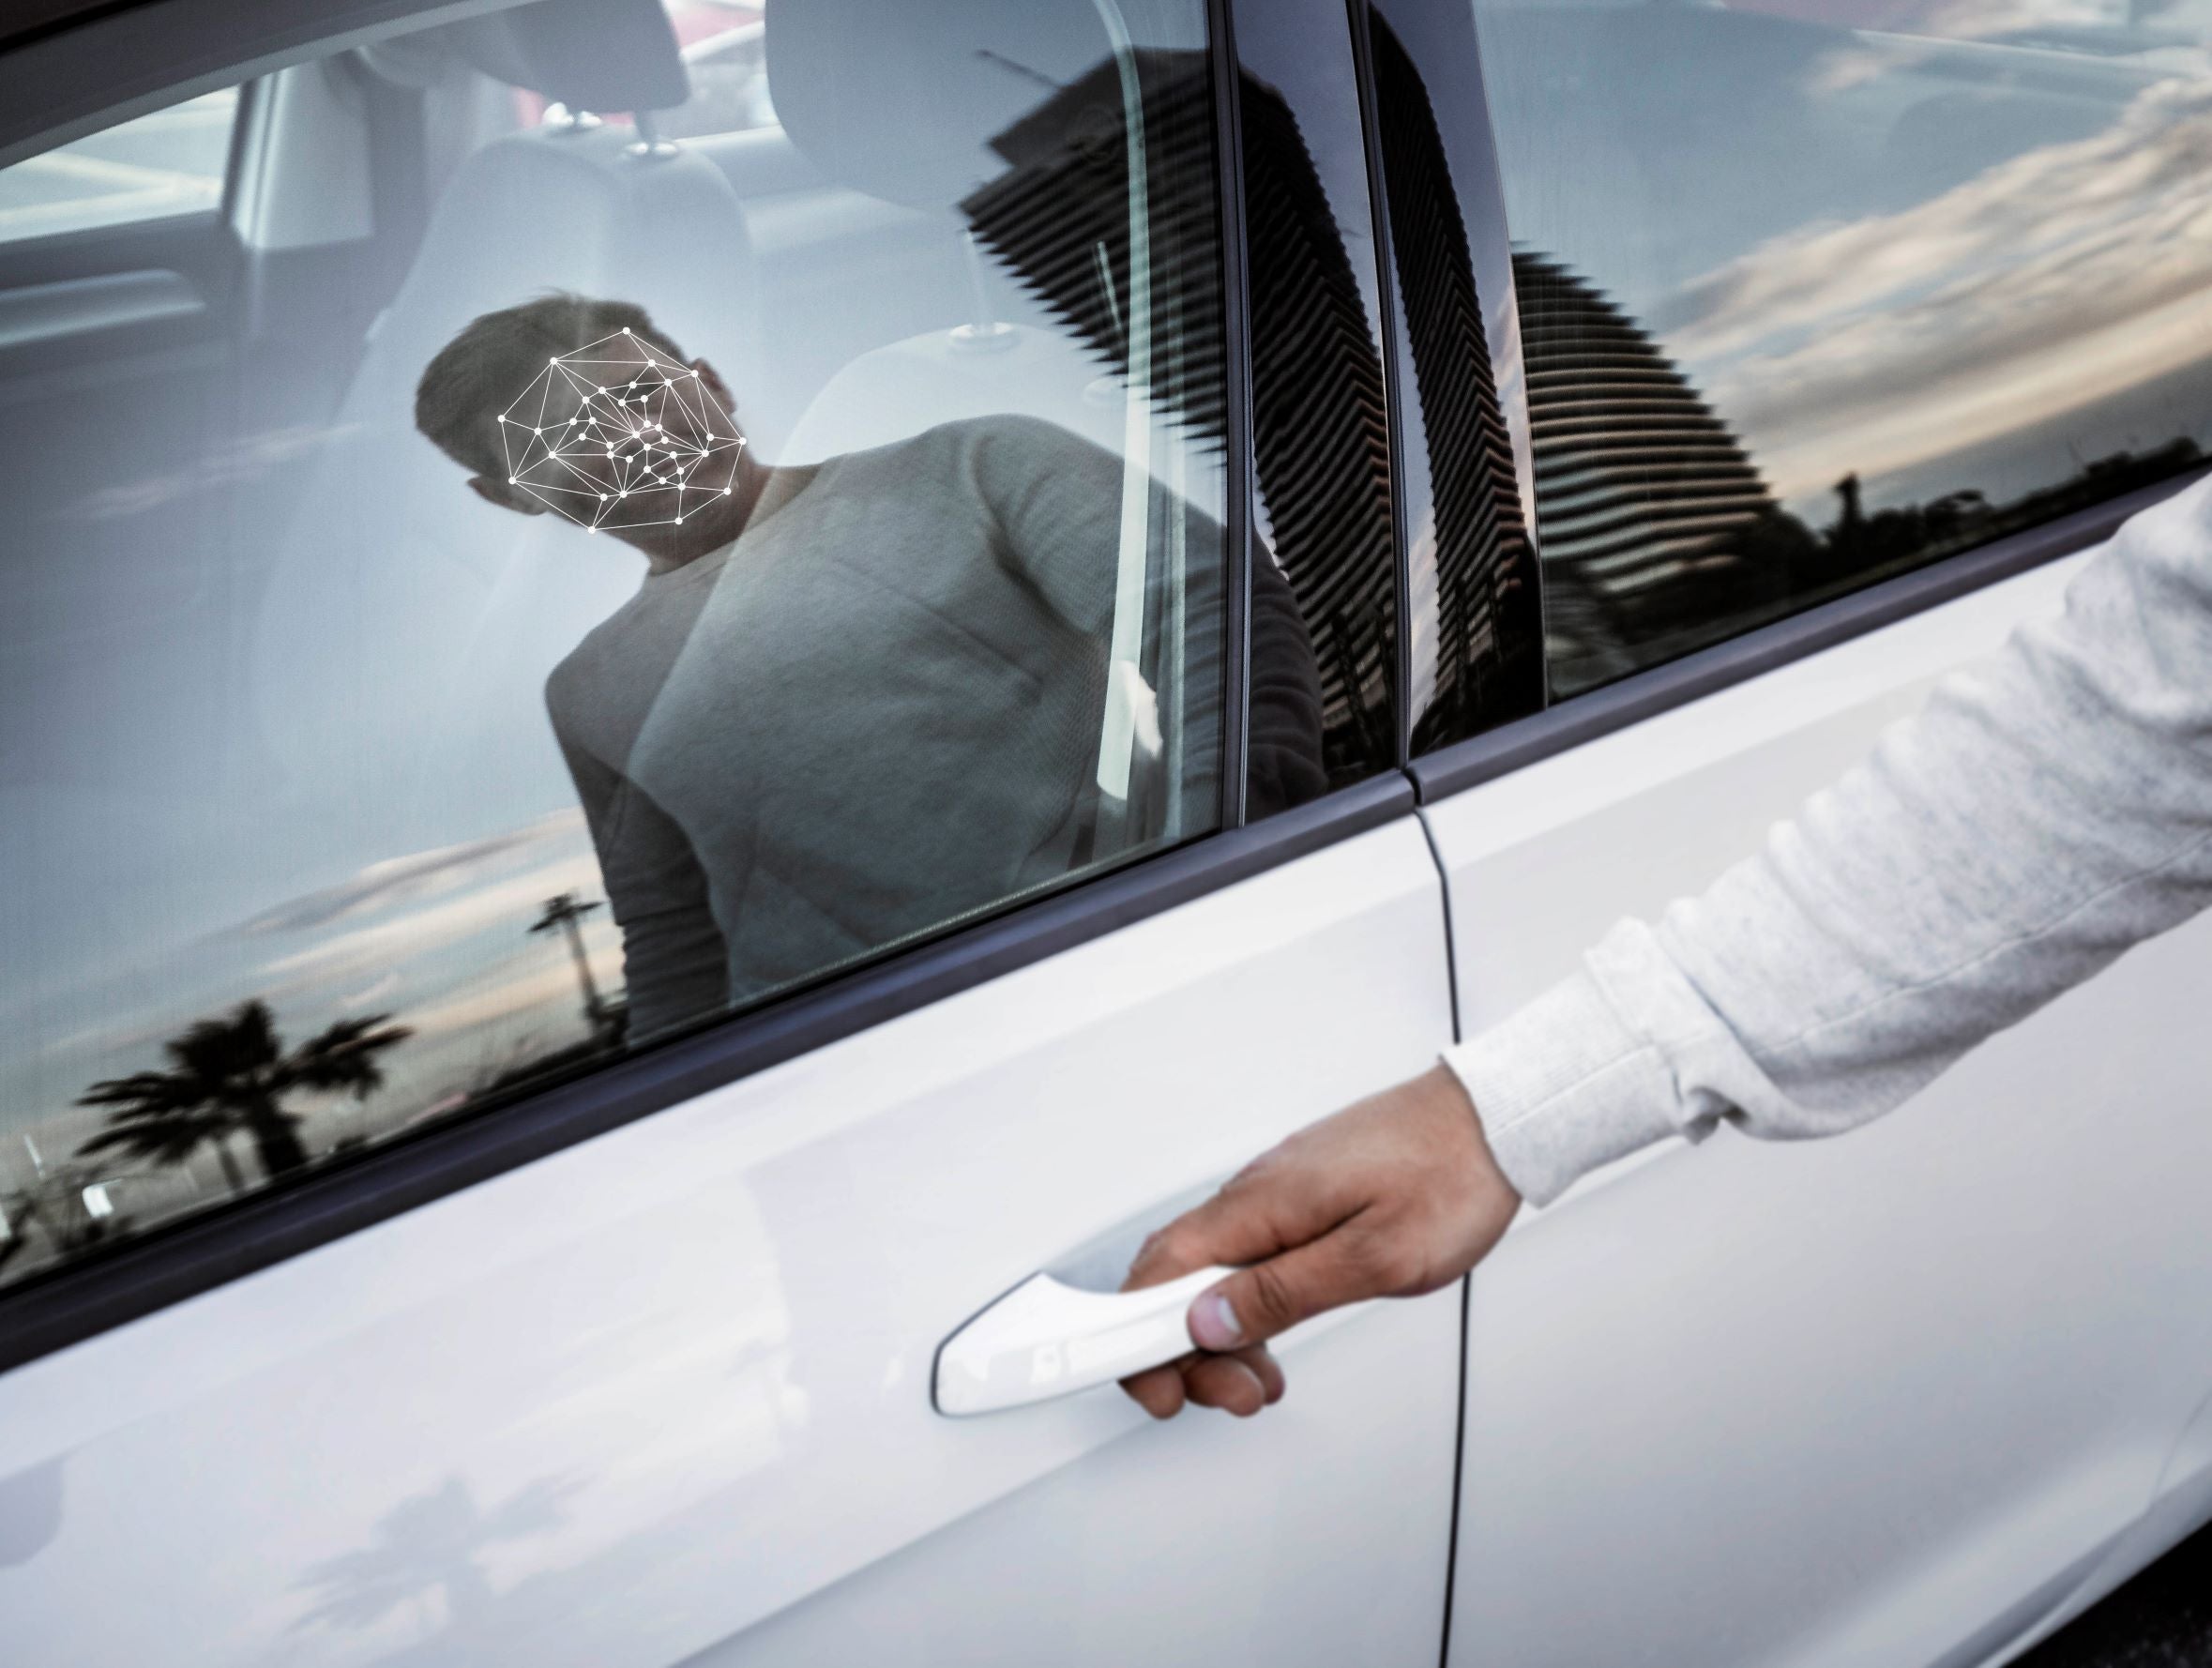 Grupo Antolin to offer face authentication vehicle access